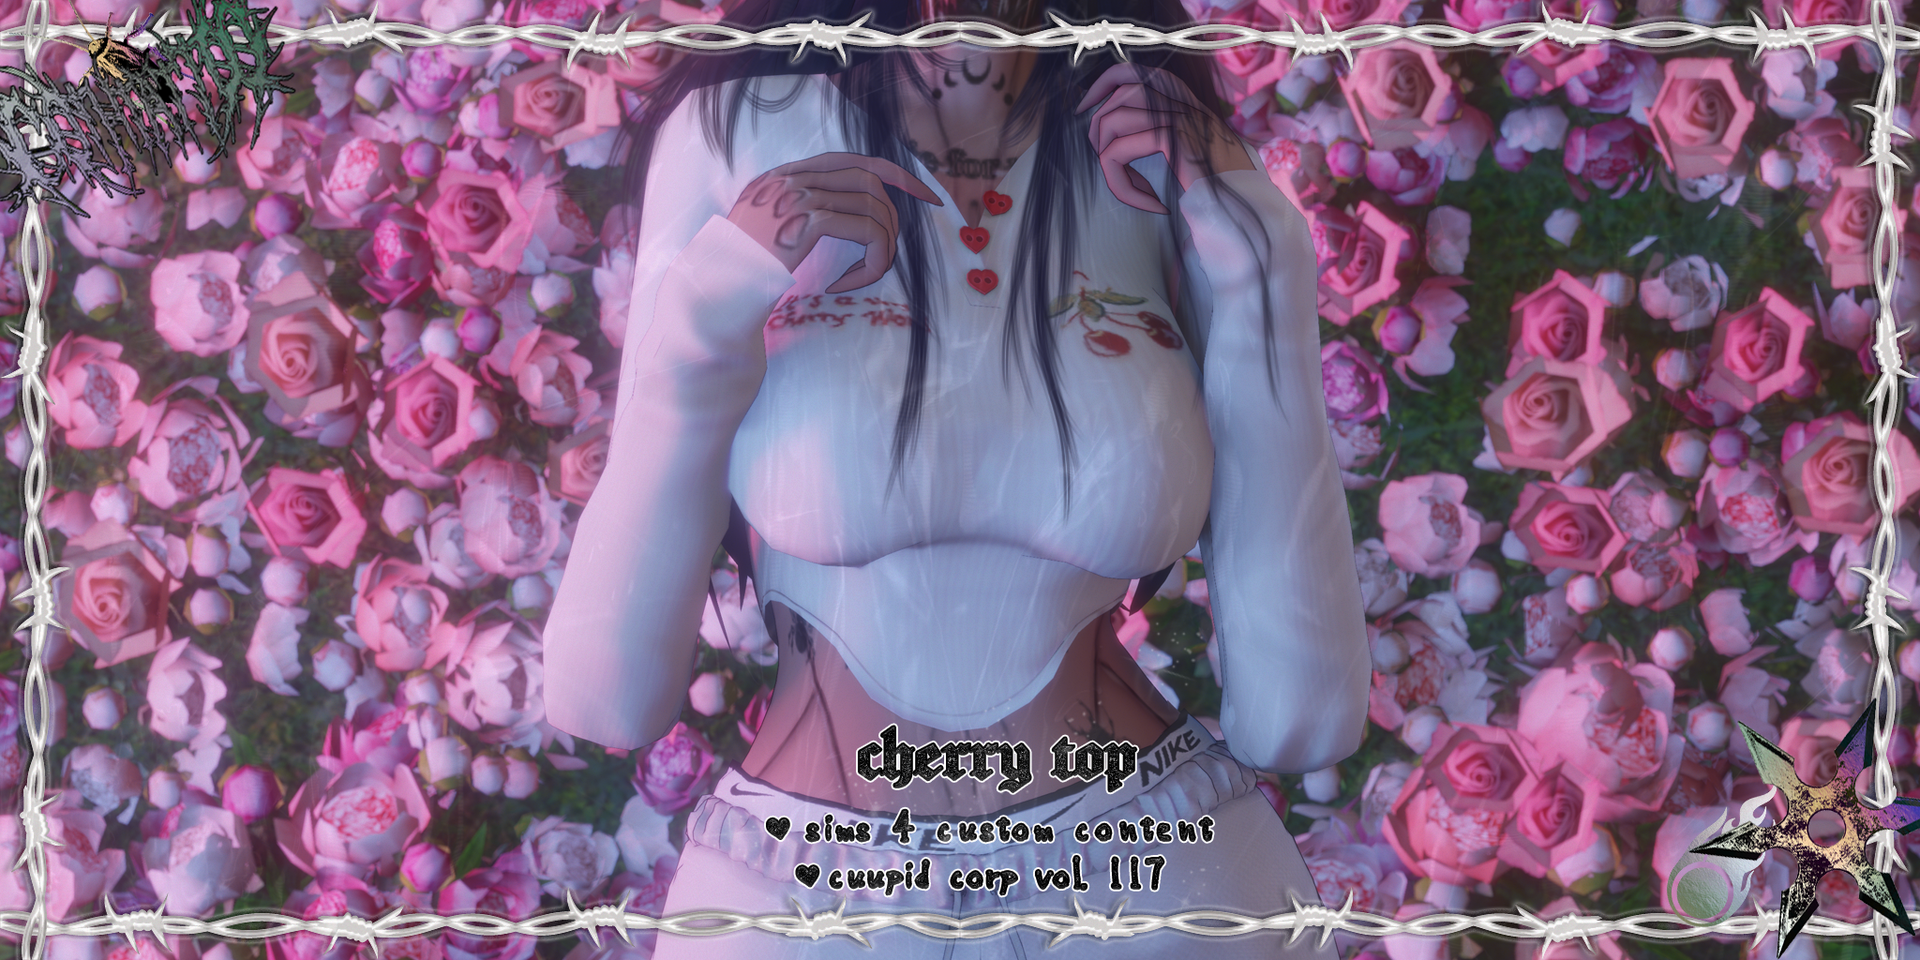 CherryTopPreview.thumb.png.79ab2c9bd720129275a96239f3d2cde2.png